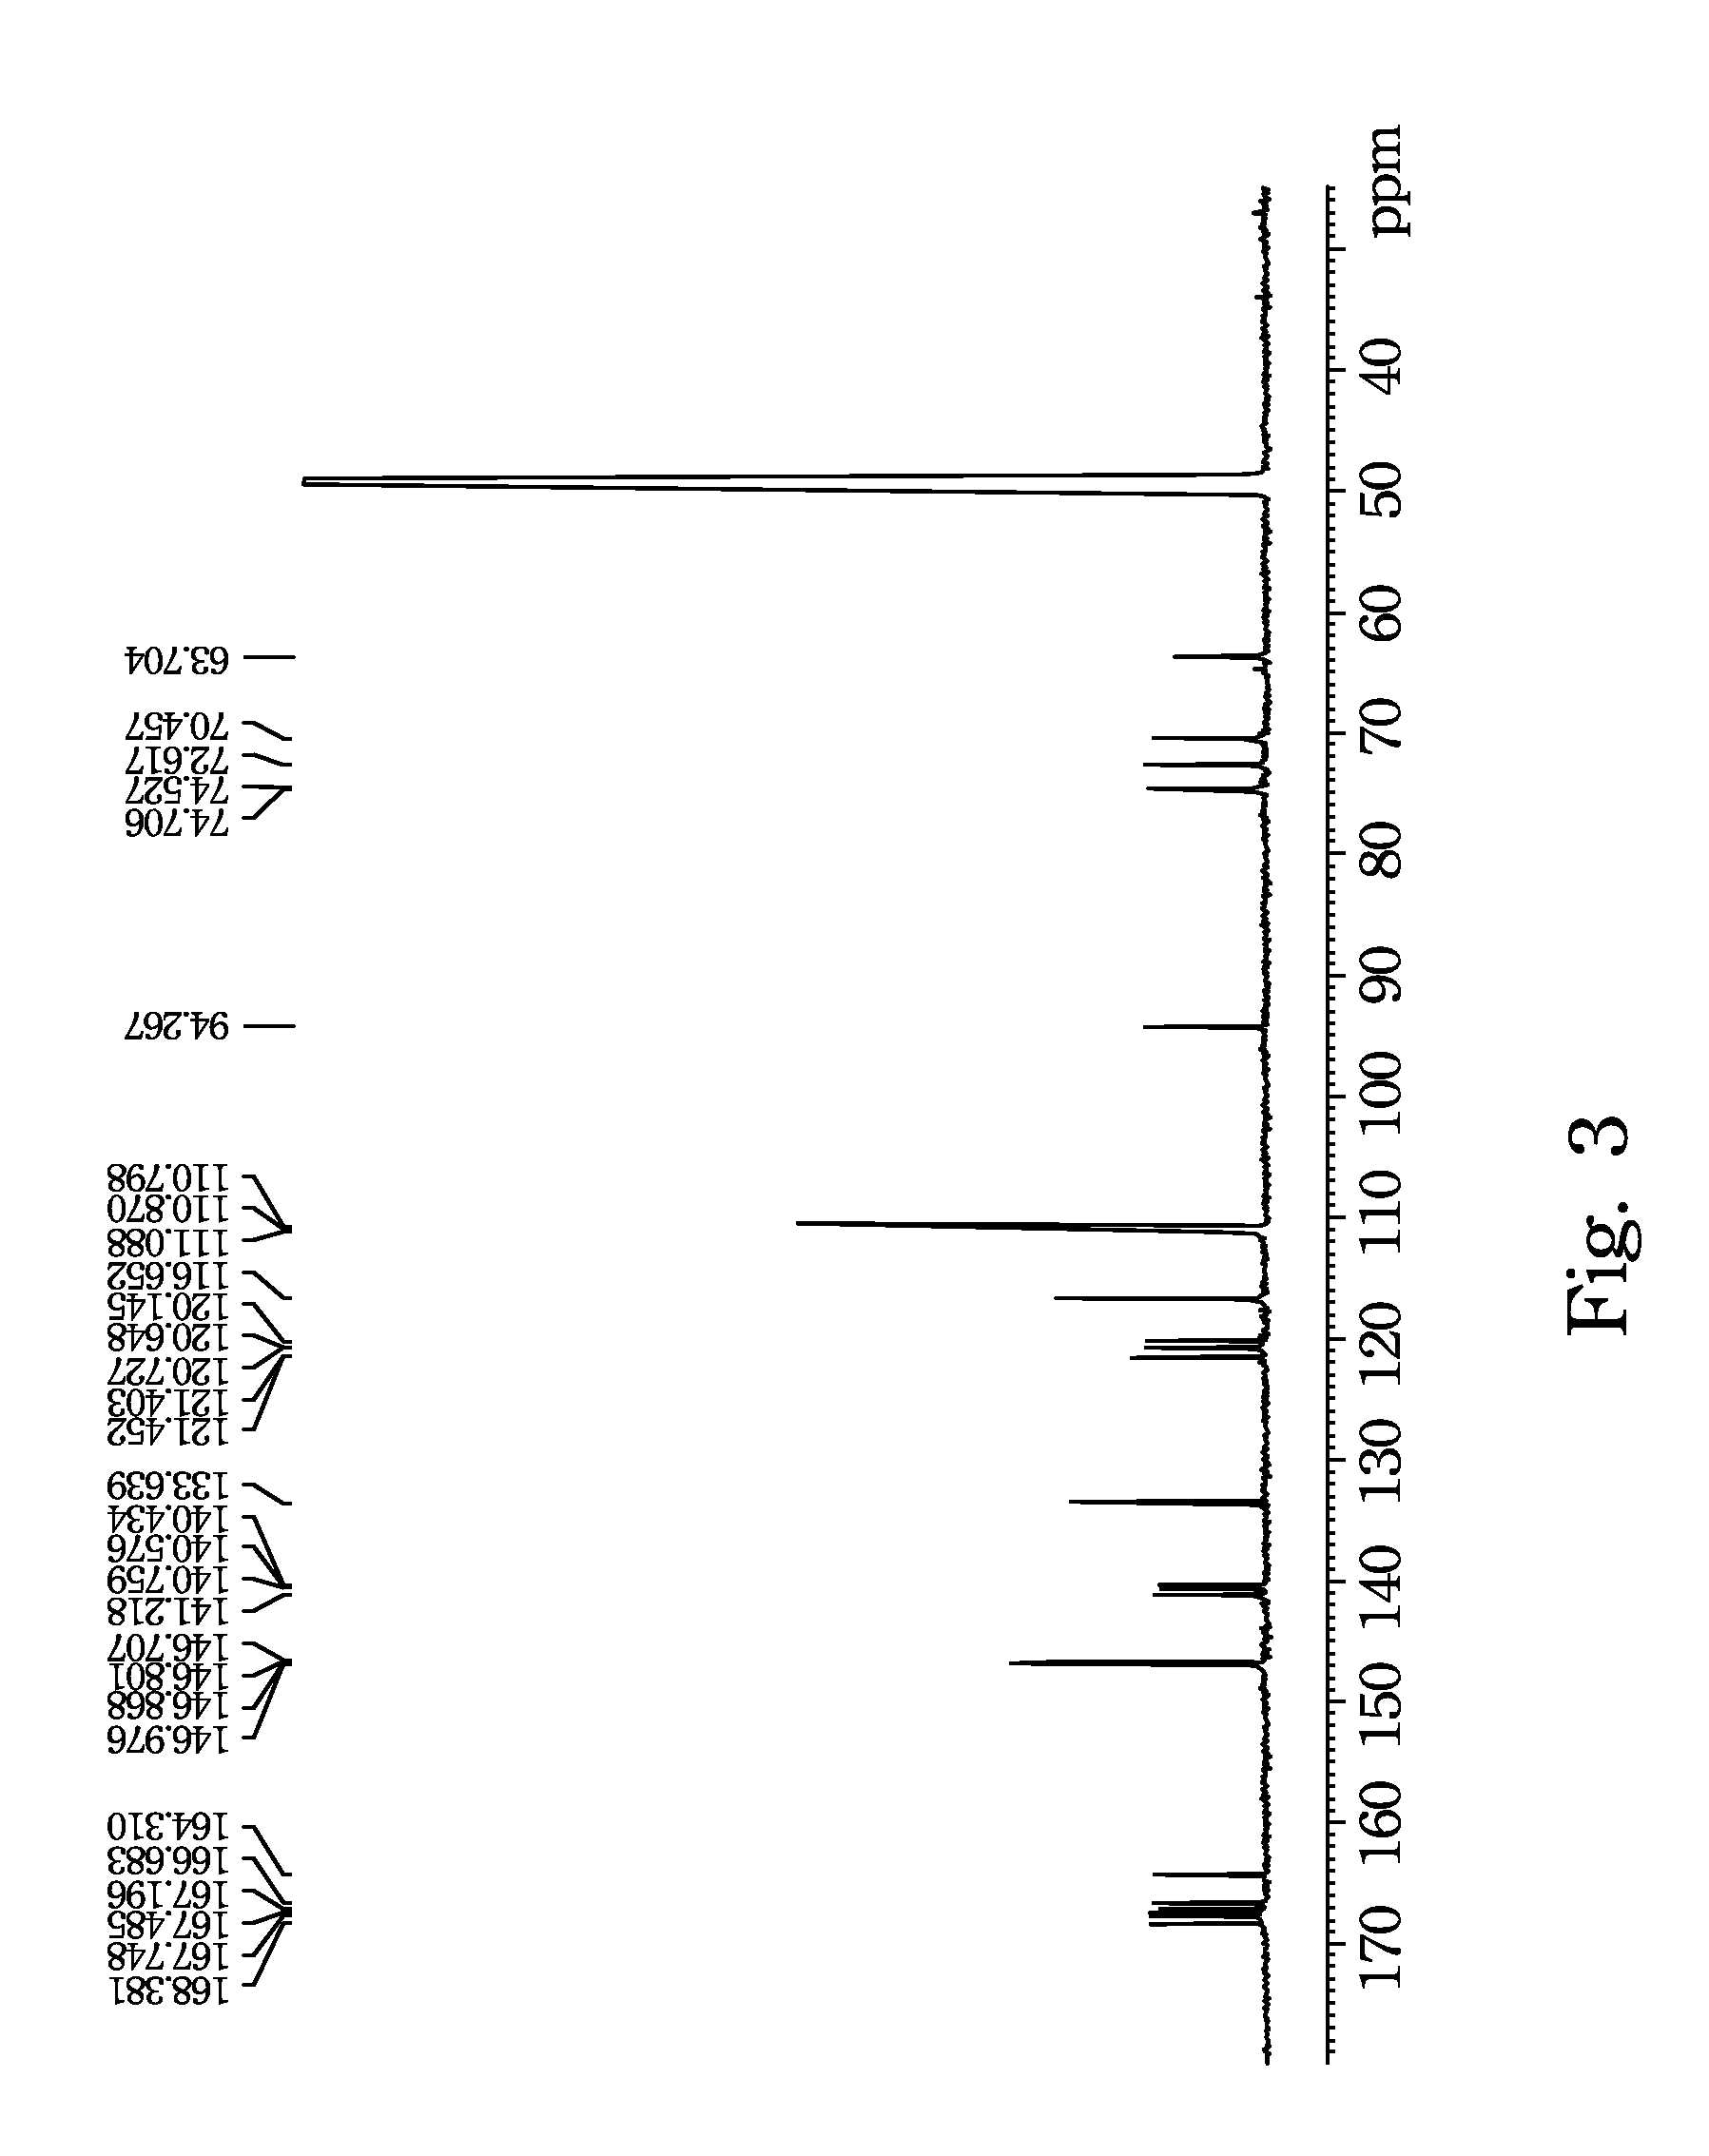 Compounds and Method for Inhibiting the Activity of Gelatinase and Collagenase